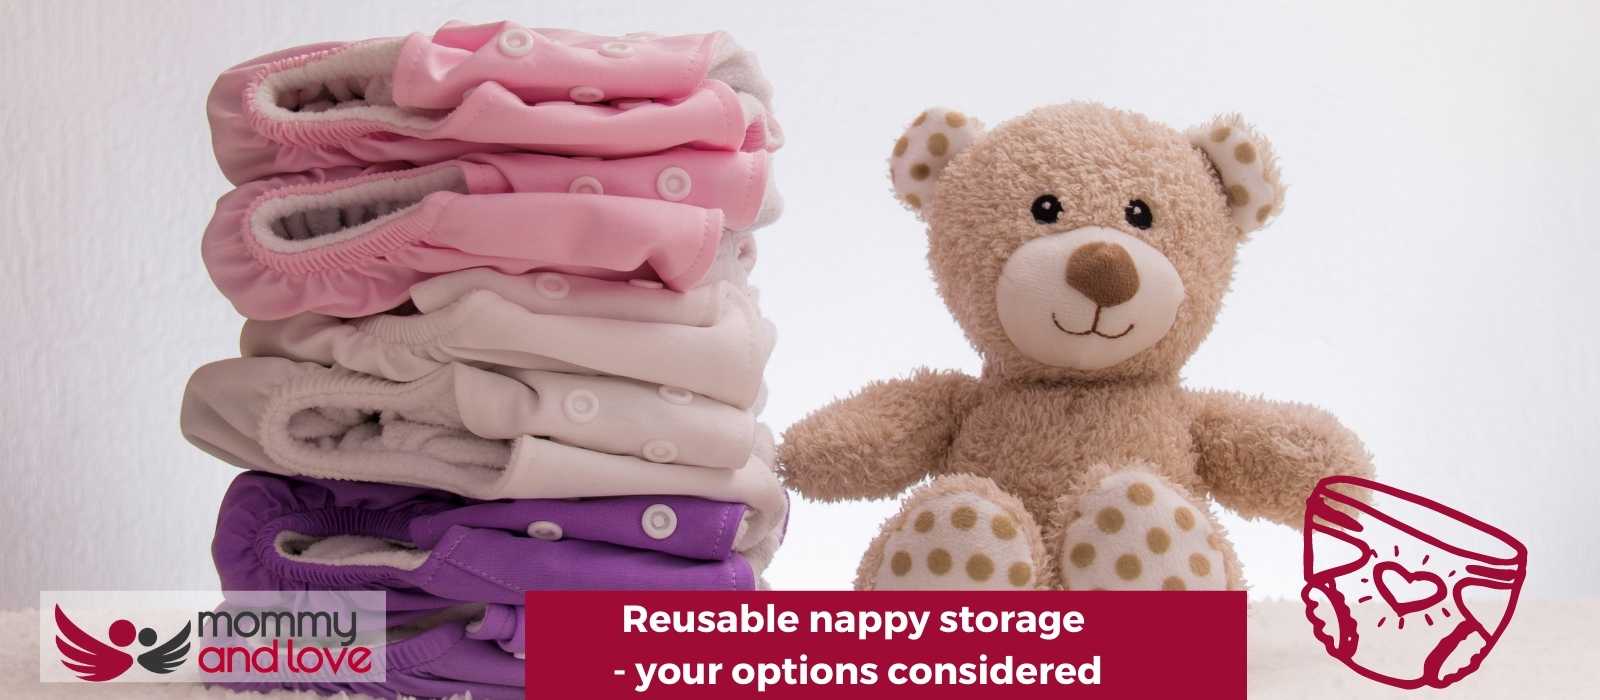 Reusable nappy storage - your options considered